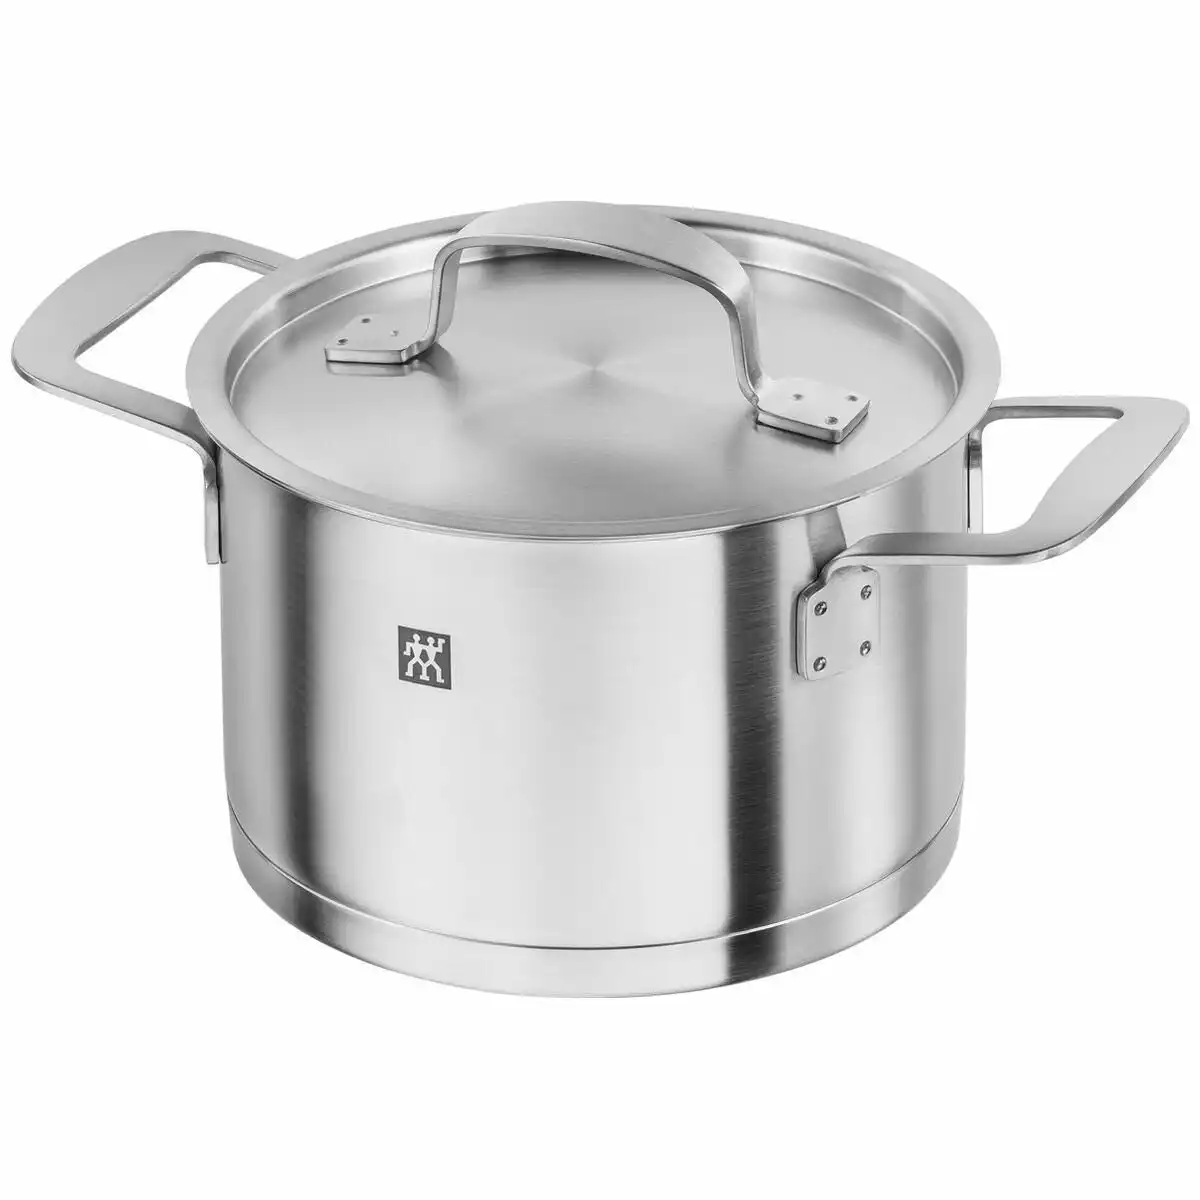 Zwilling 16cm Base Stock Pot with Lid